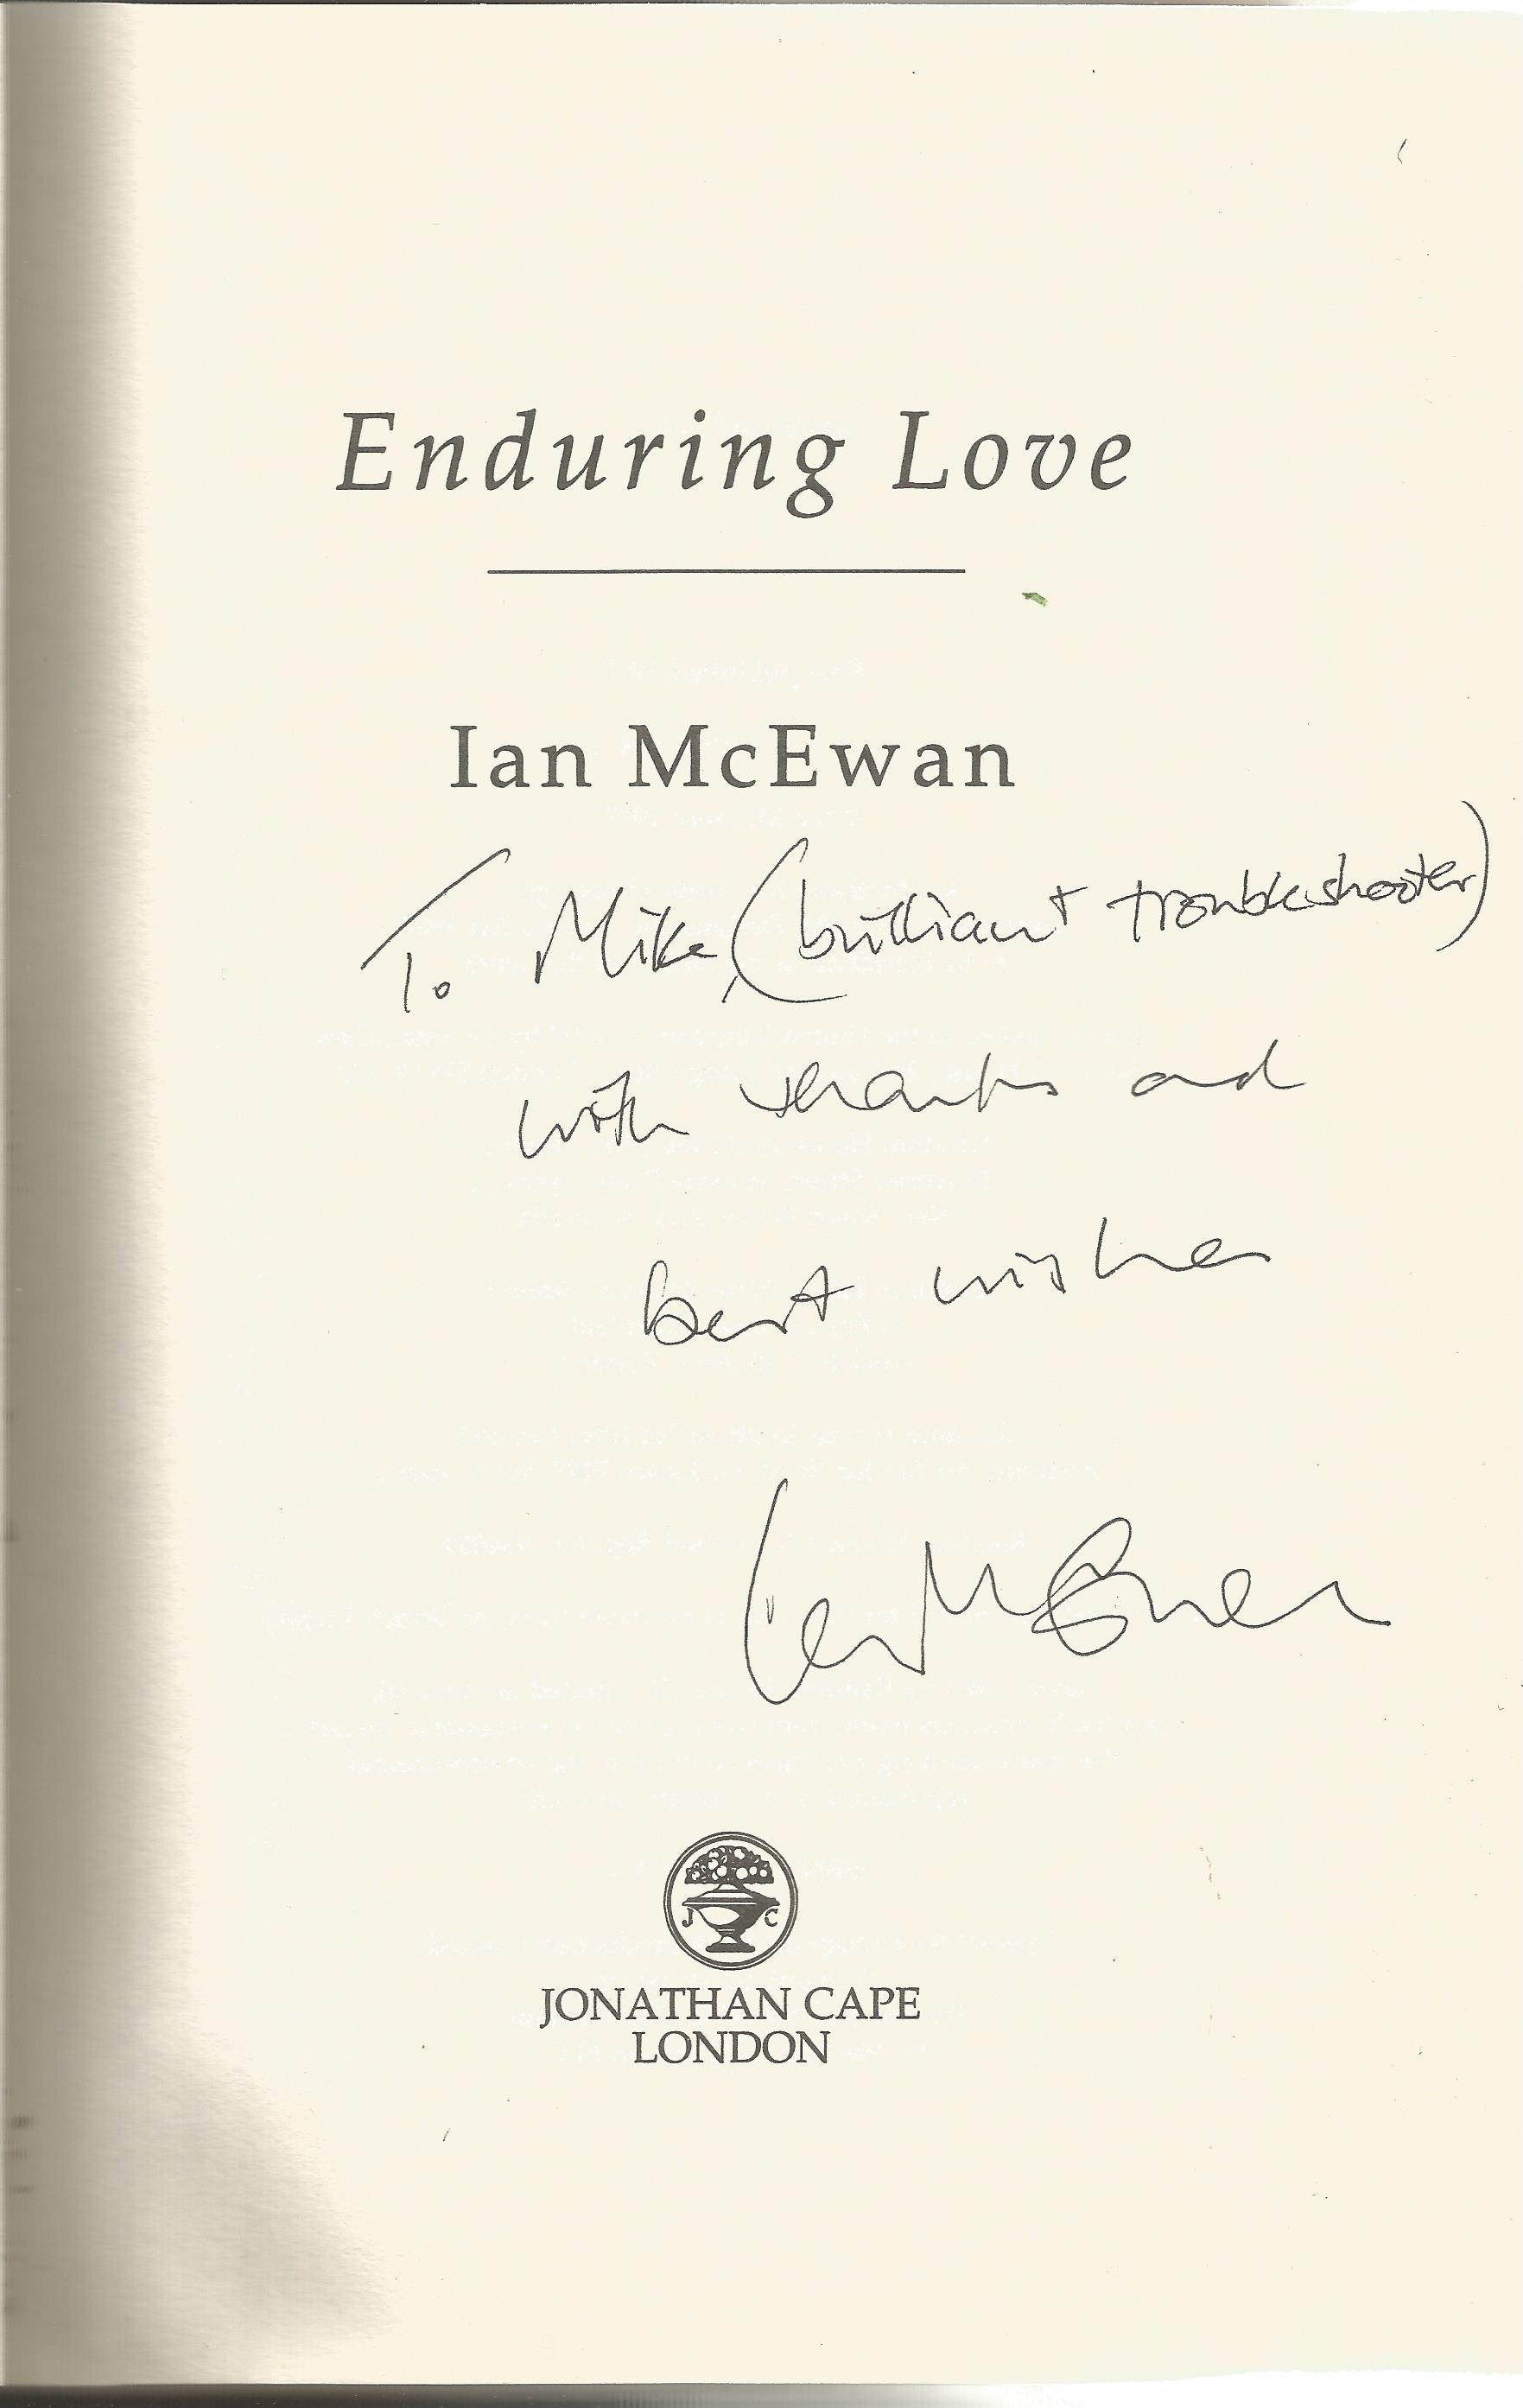 Ian McEwan Hardback Book Enduring Love signed by the Author on the Title Page some marks on back - Image 2 of 2